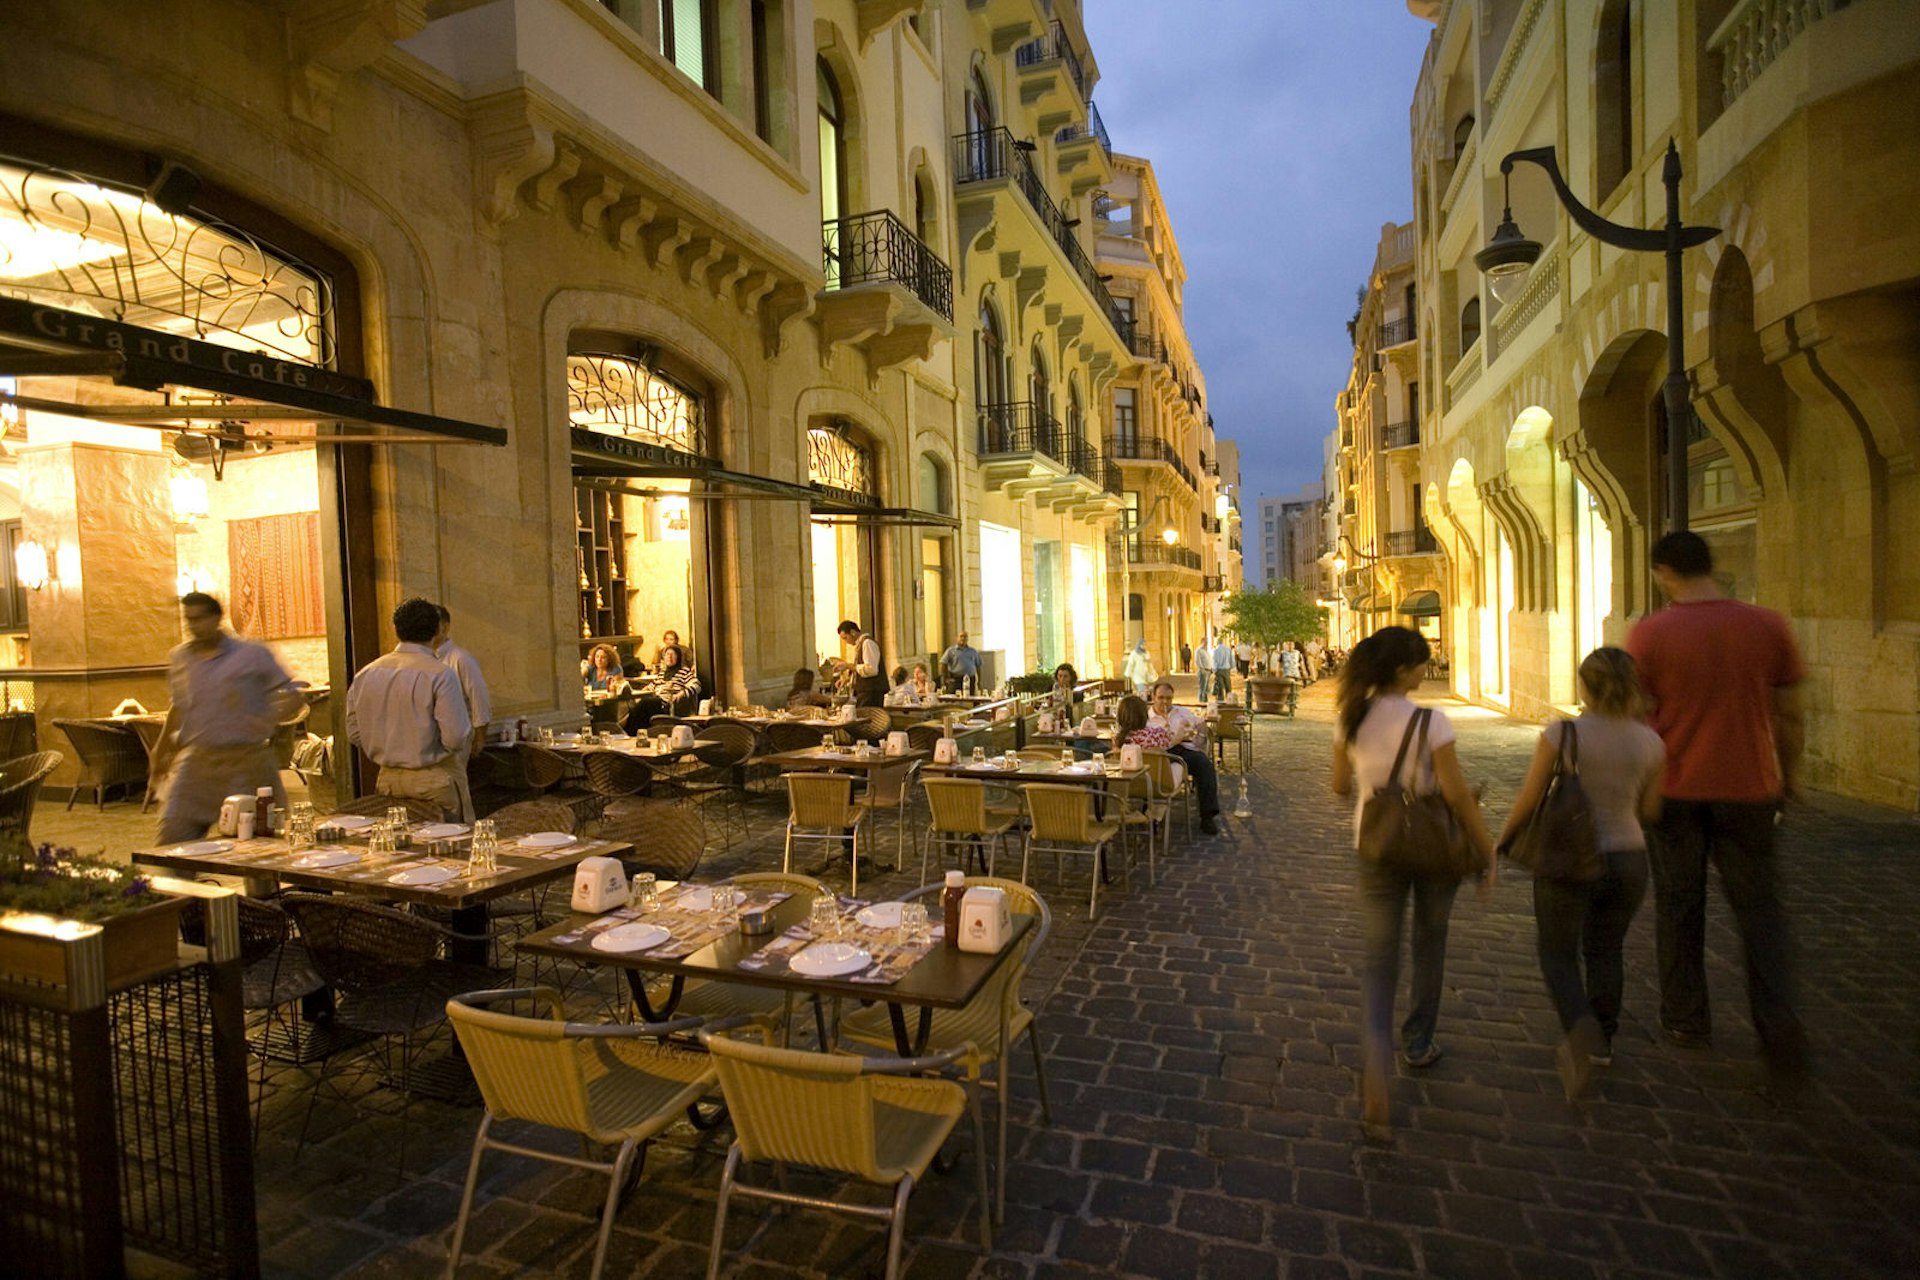 Al-fresco restaurant in the downtown area of Beirut, Lebanon. Image by Celia Peterson / Getty Images